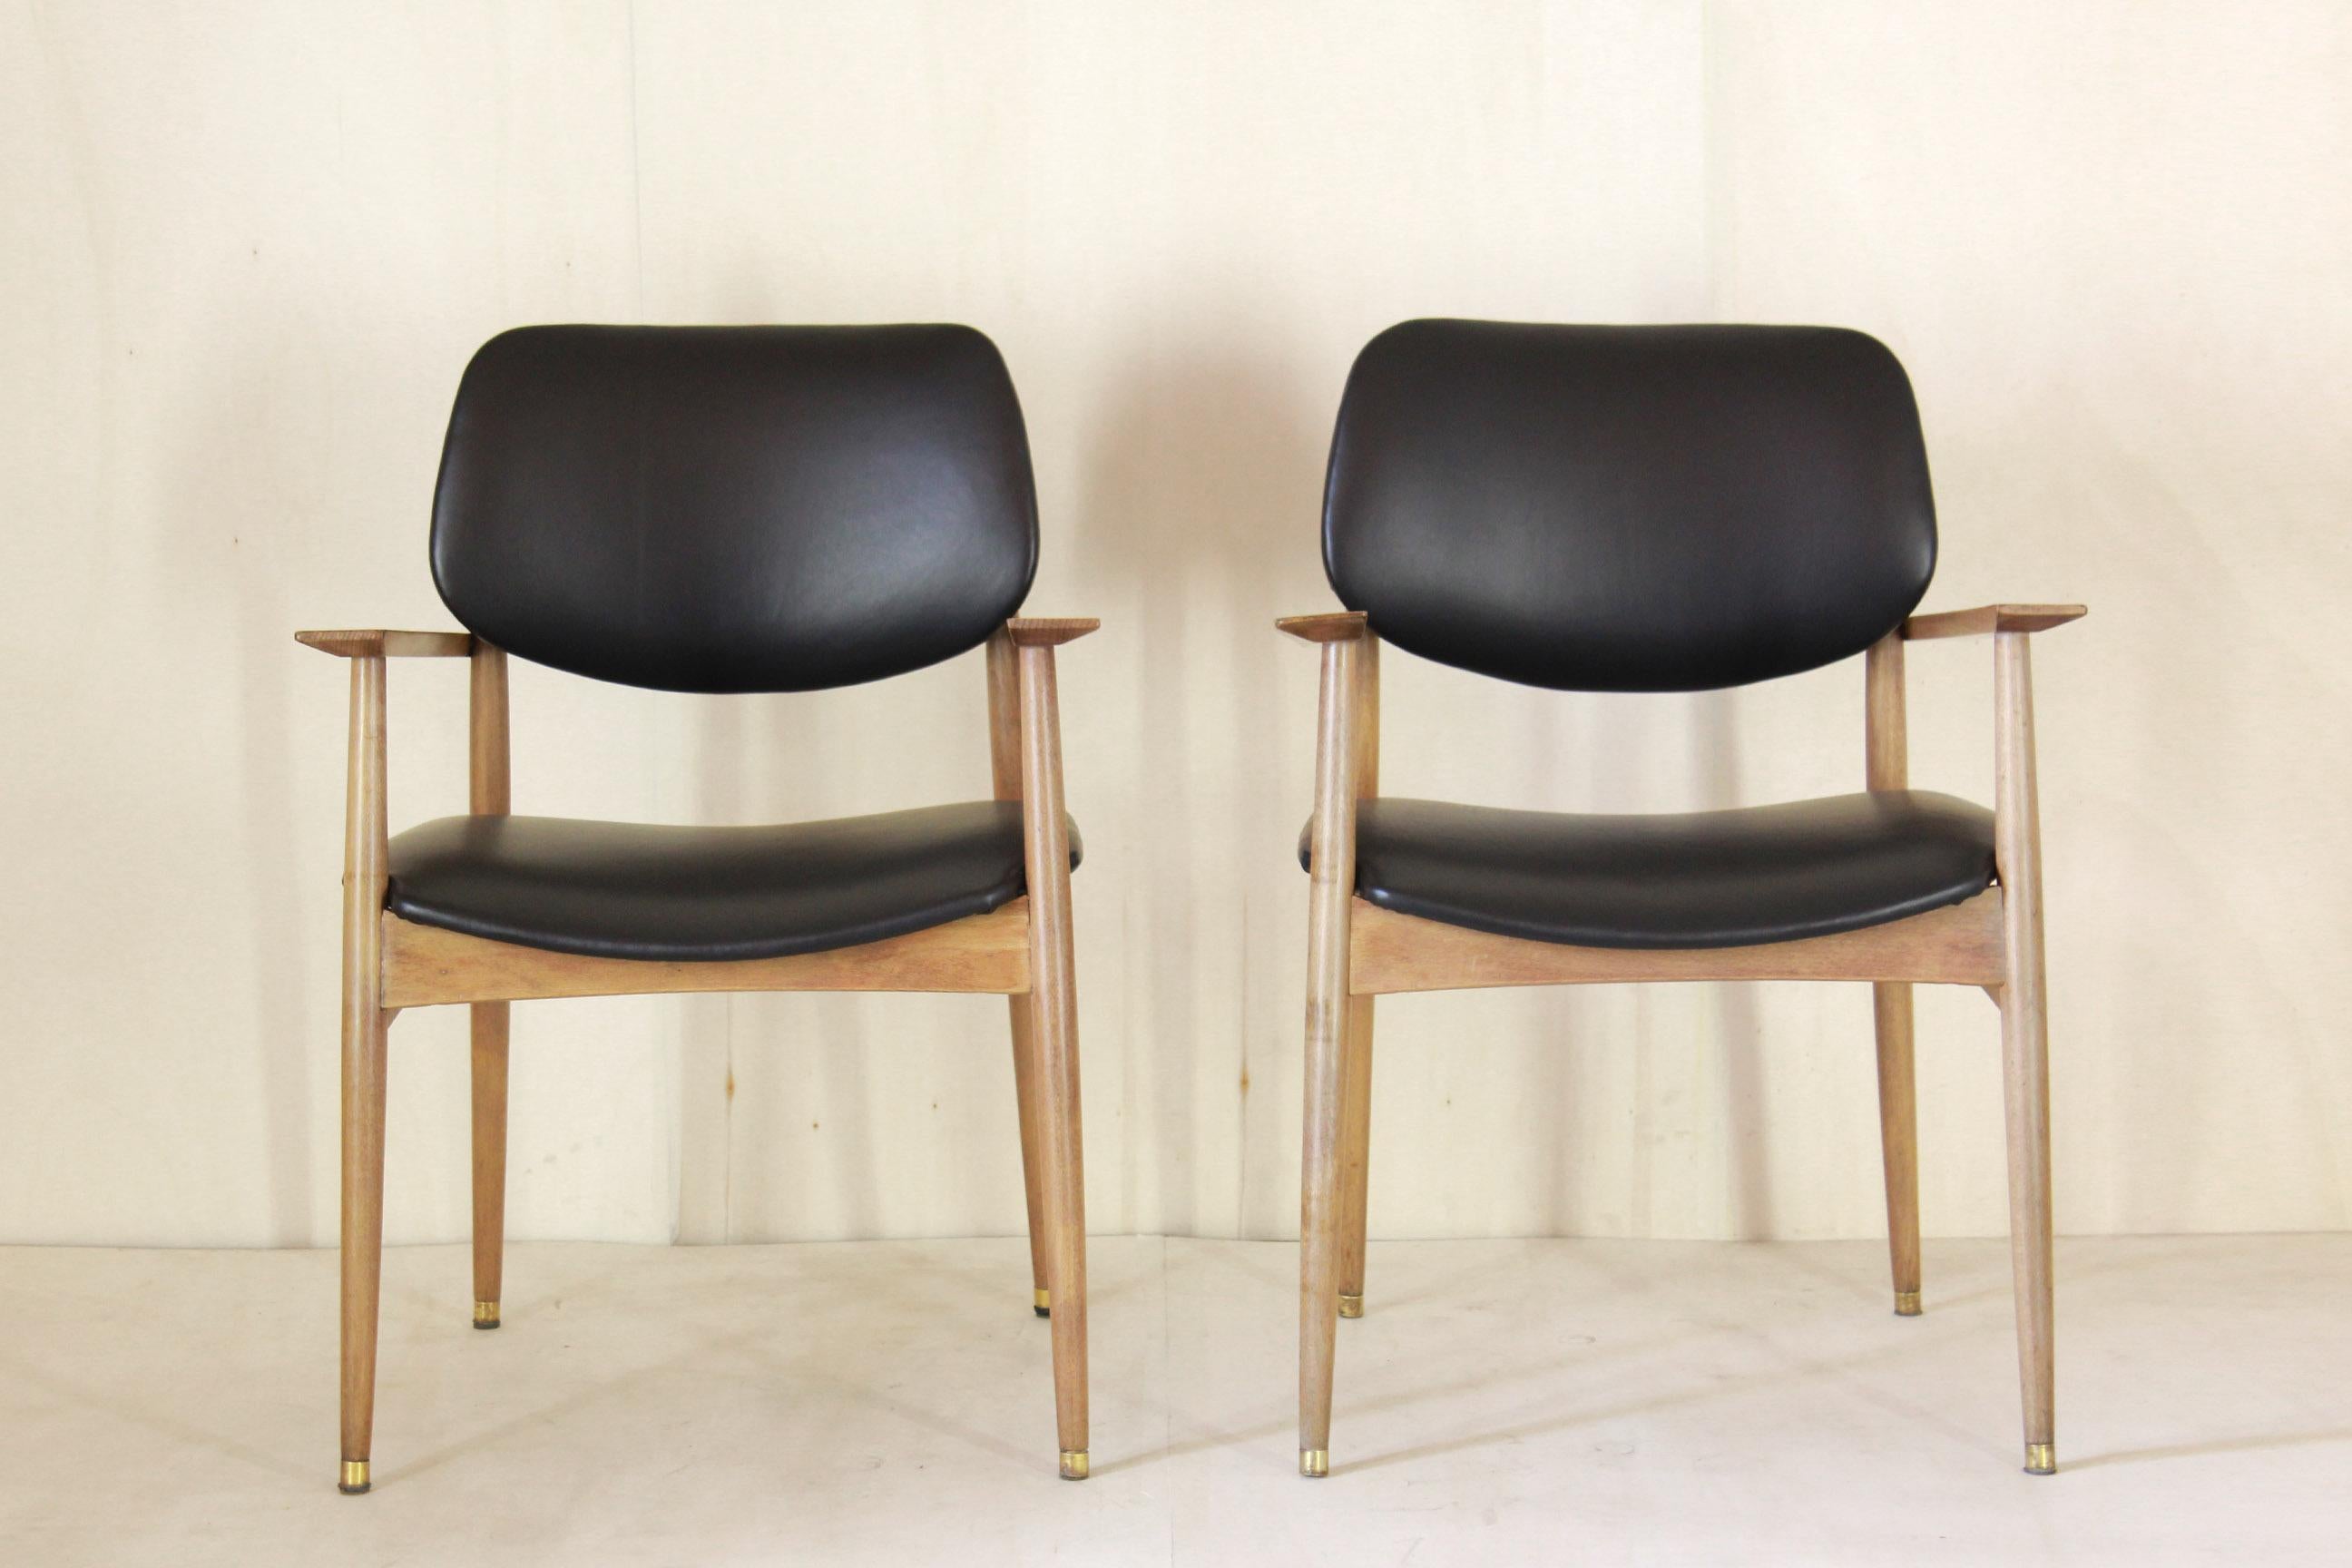 Vintage black leather office Chairs, Set of Two, Italy 1950s.
A set of two vintage lounge / desk armchairs with beechwood structure and bovine leather seat and back. The item has been restored as follows:
The wood has been polished and cleaned
The